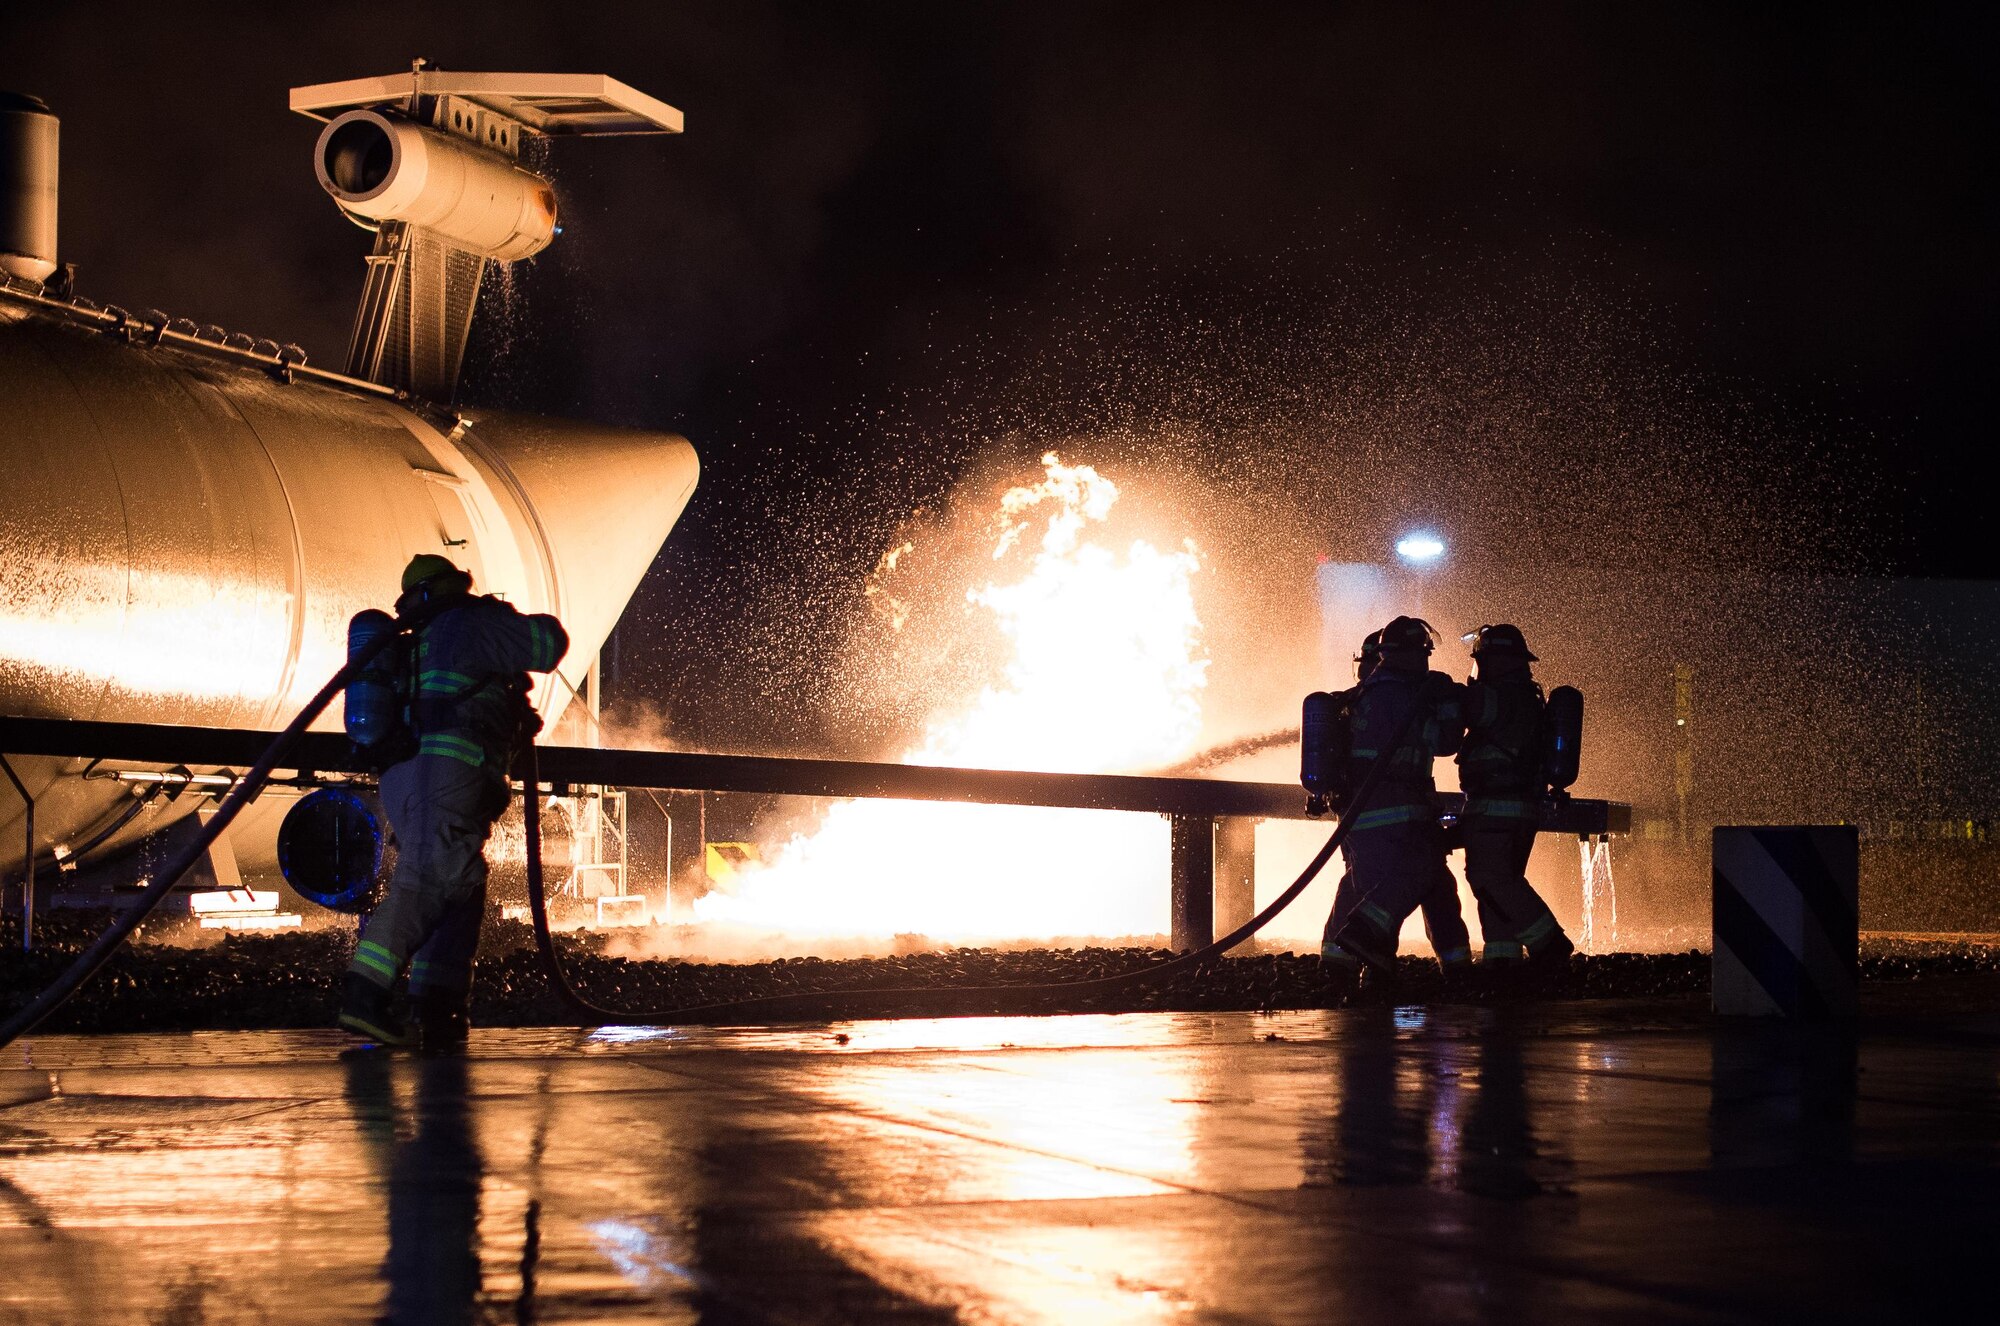 Firefighters and base leadership demonstrate extinguishing an aircraft fire Oct. 8, 2015, at Ramstein Air Base, Germany. As part of Fire Prevention Week, families visited Fire Station 1 to learn about fire safety, including home-fire safety issues, fire extinguisher training and holiday safety tips. (U.S. Air Force photo/Senior Airman Damon Kasberg)